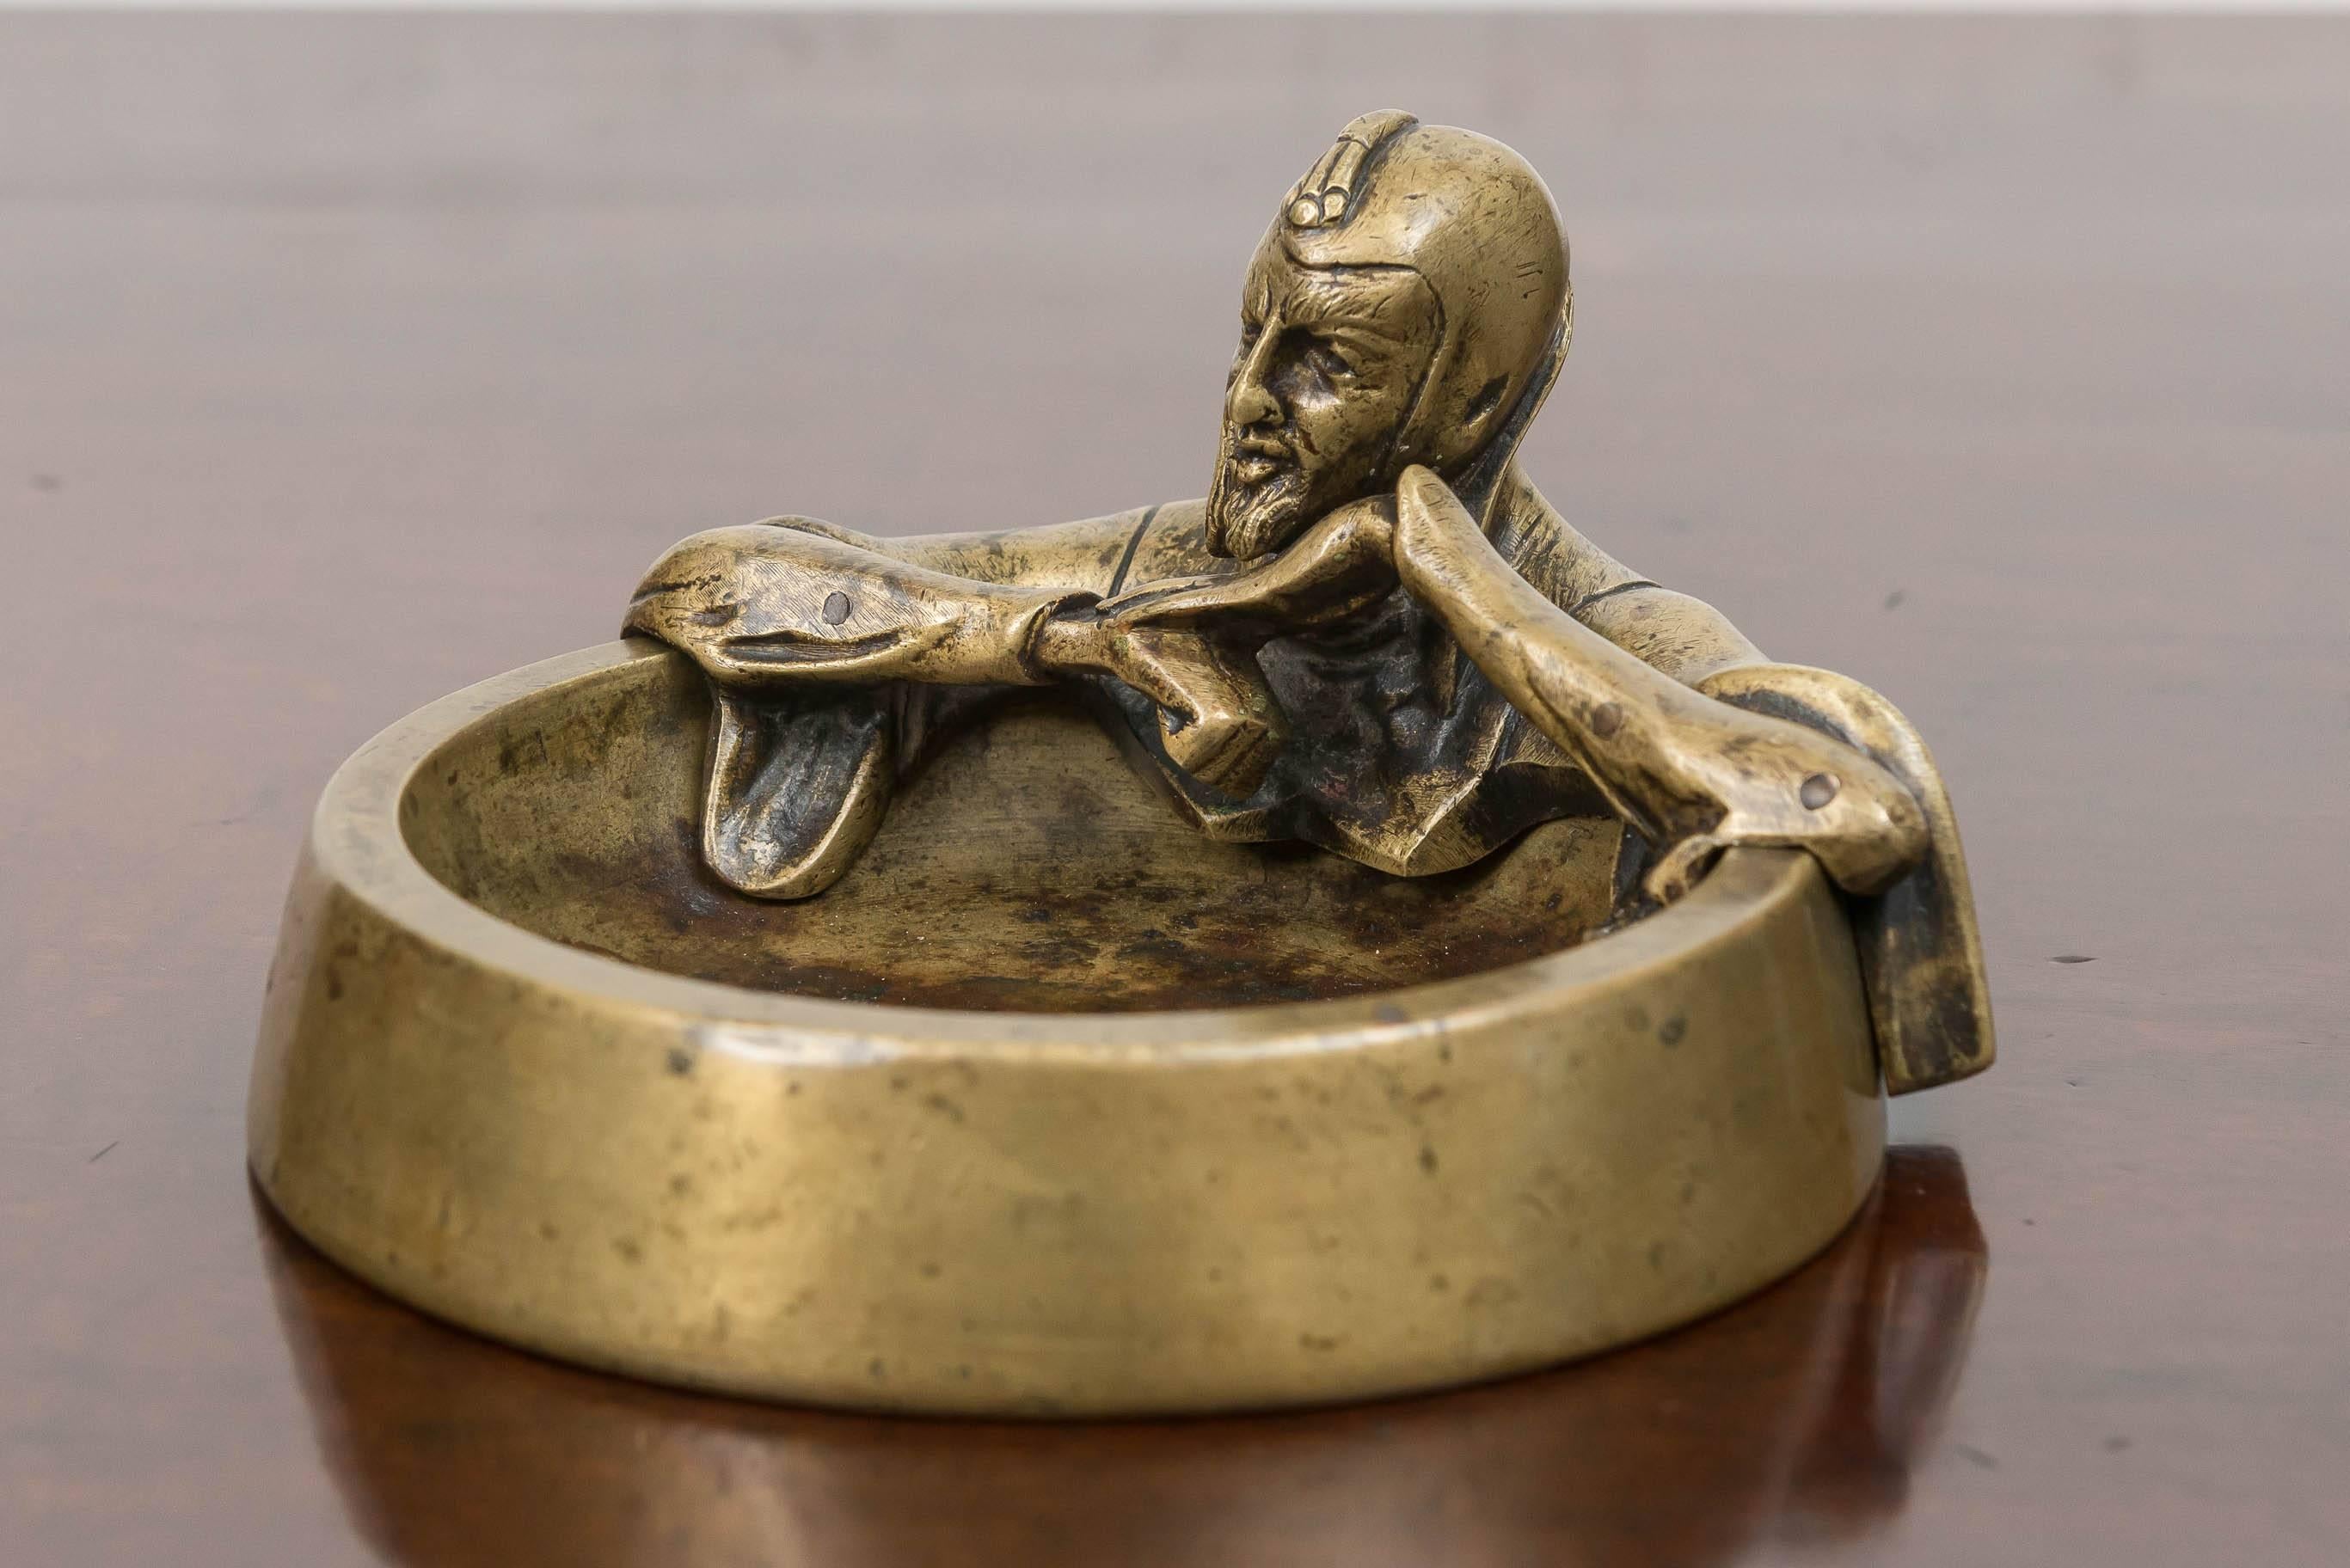 Late 19th C Effigy of Mephistopheles on a bronze dresser tray. Leaning into the tray with a contemplative pose and conniving expression. Best known for his role in Faust. Caught in his own hell as an agent of Lucifer. Though an agent of Lucifer he